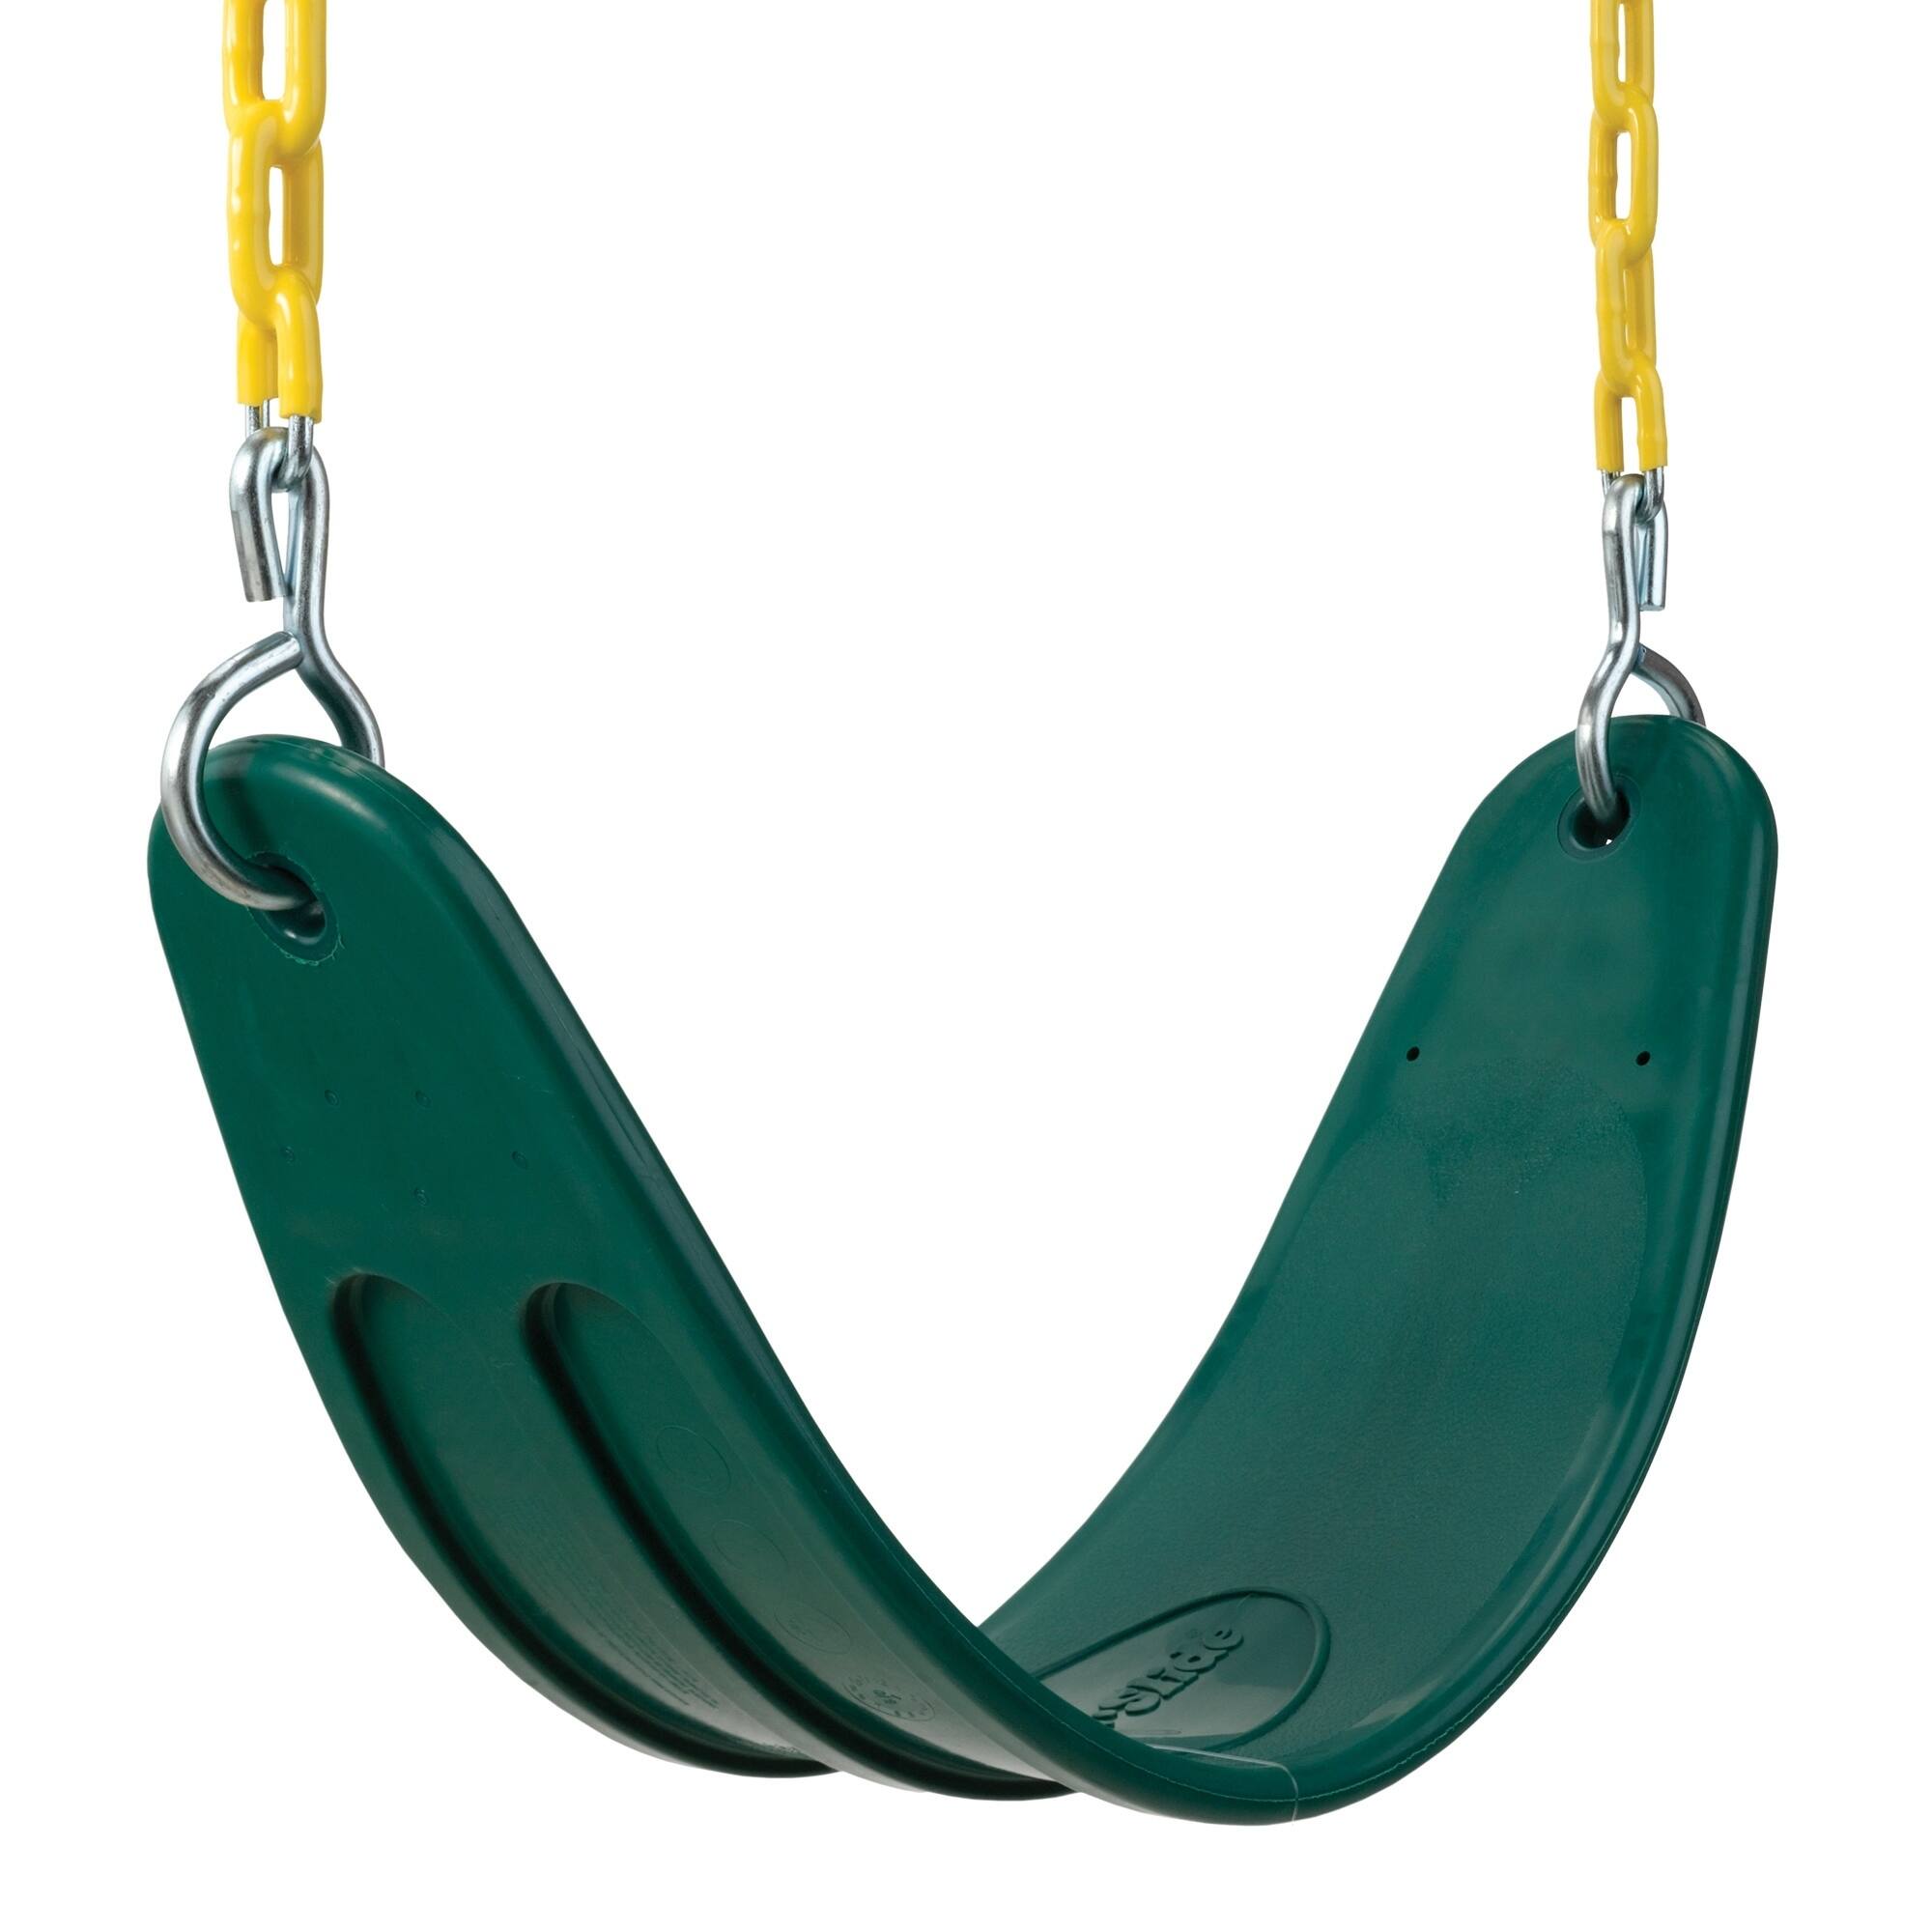 Swing-N-Slide Extreme-Duty Swing Seats with Chains - Green (2-Pack) - 26" L x 6" W x .5" Thick - 26" L x 6" W x .5" Thick